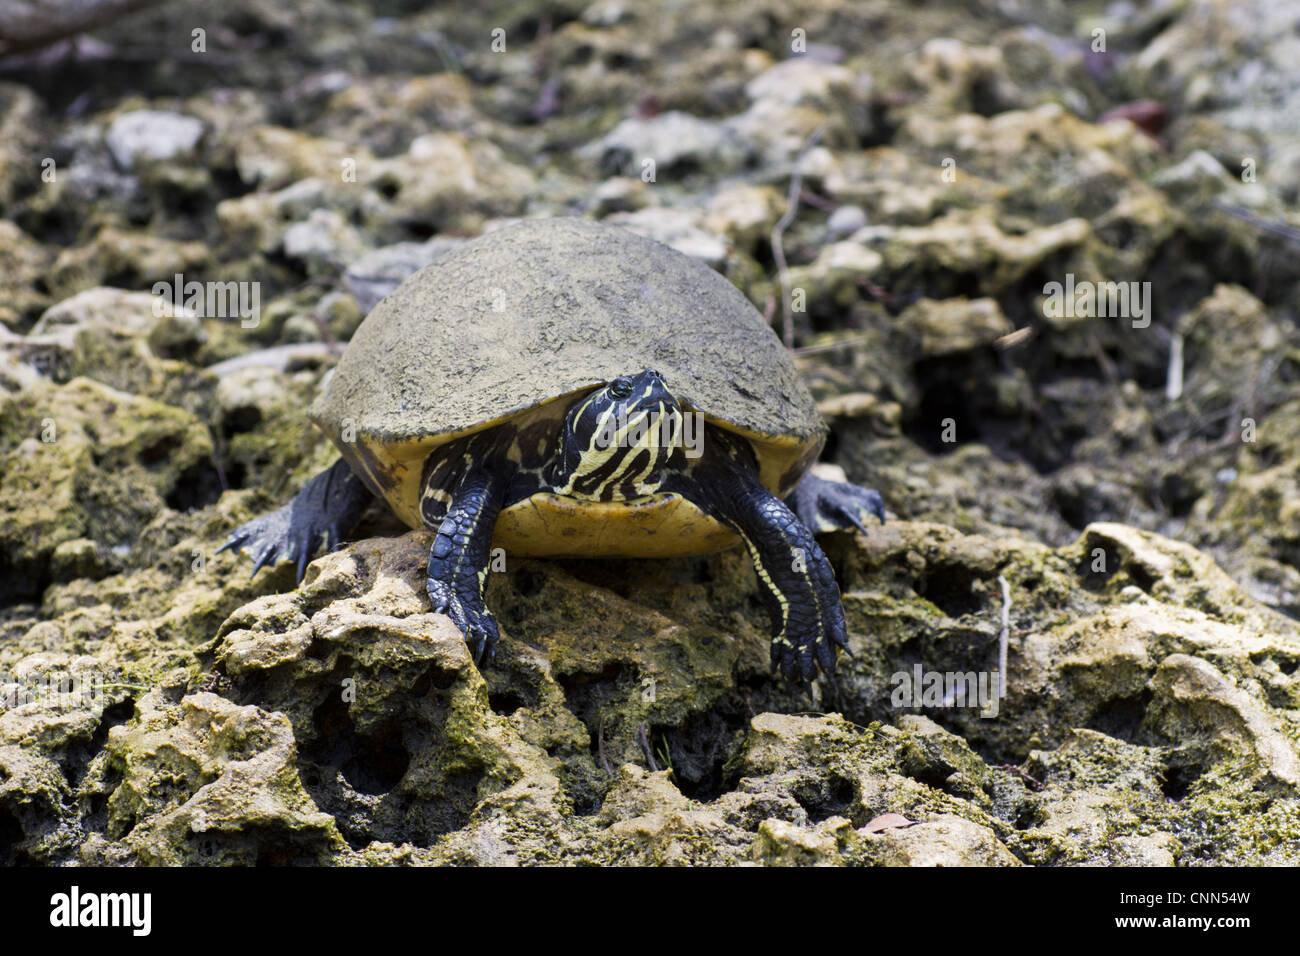 Florida Red-bellied Turtle (Pseudemys nelsoni) adult, resting on rock, Big Cypress Swamp, Florida, U.S.A. Stock Photo